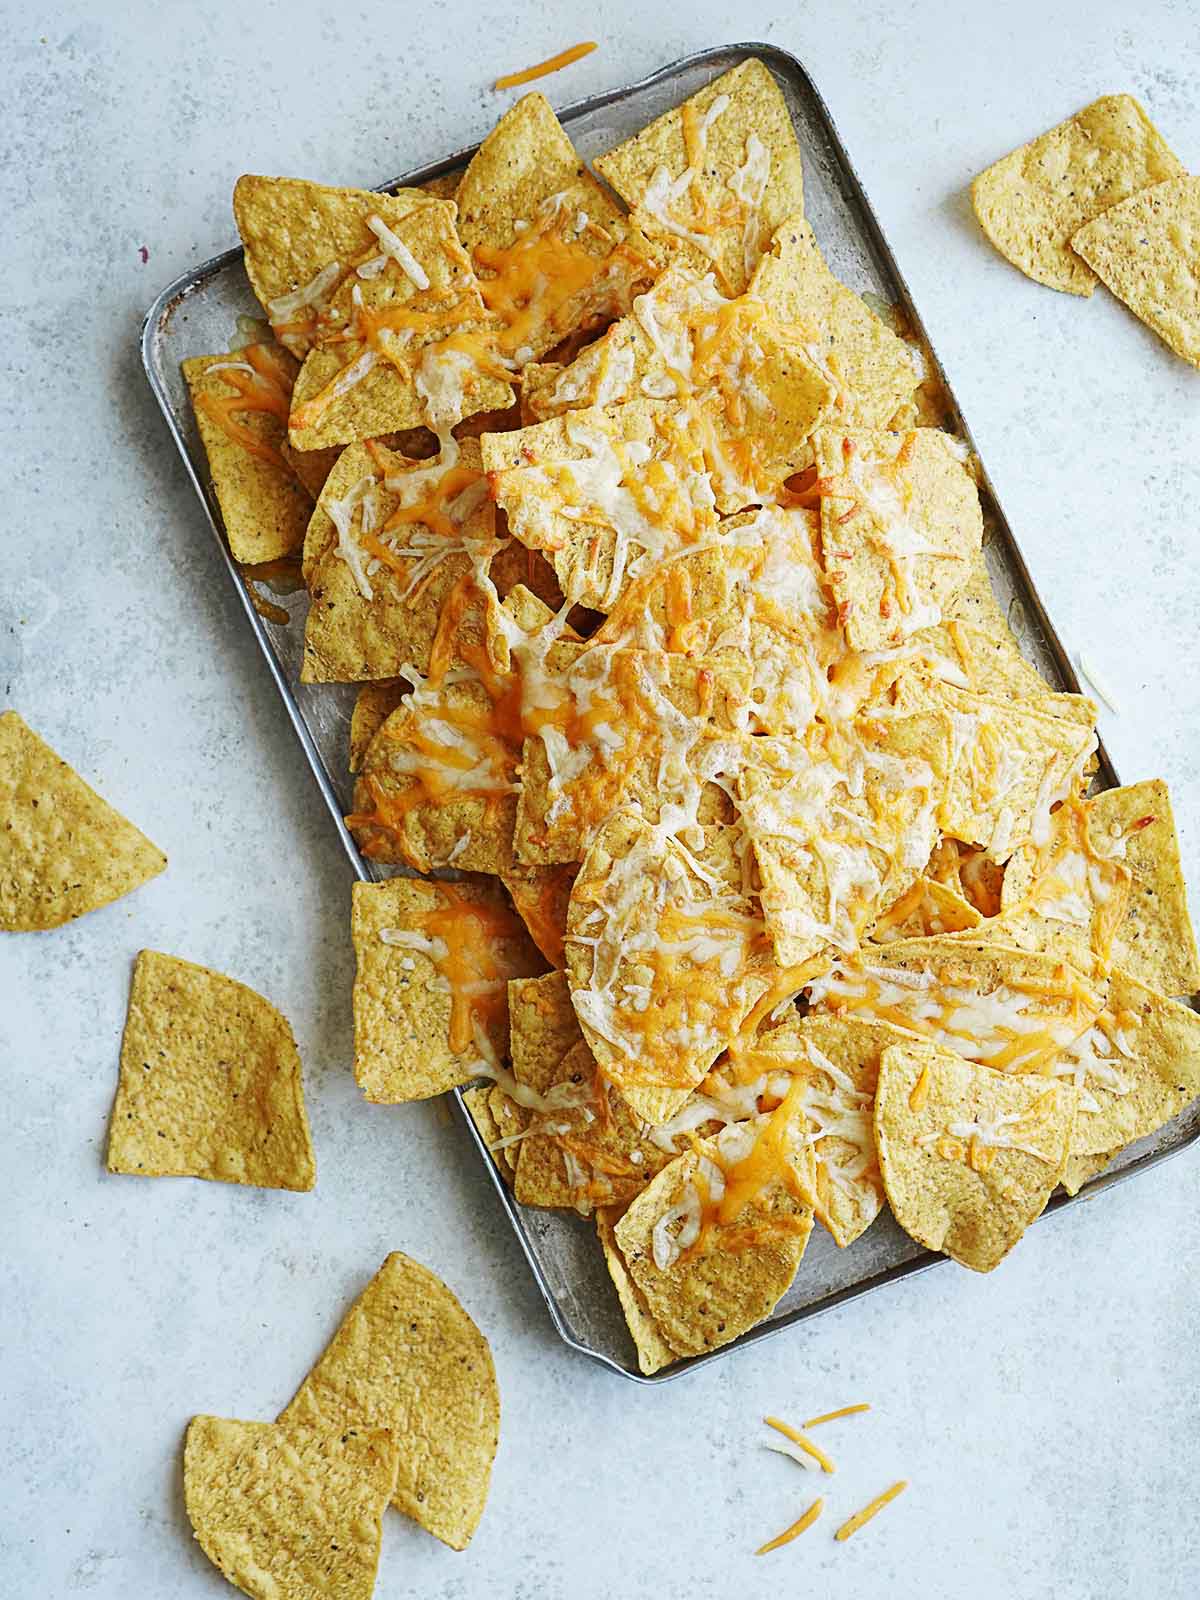 A baking tray with tortilla chips baked with melted cheese.